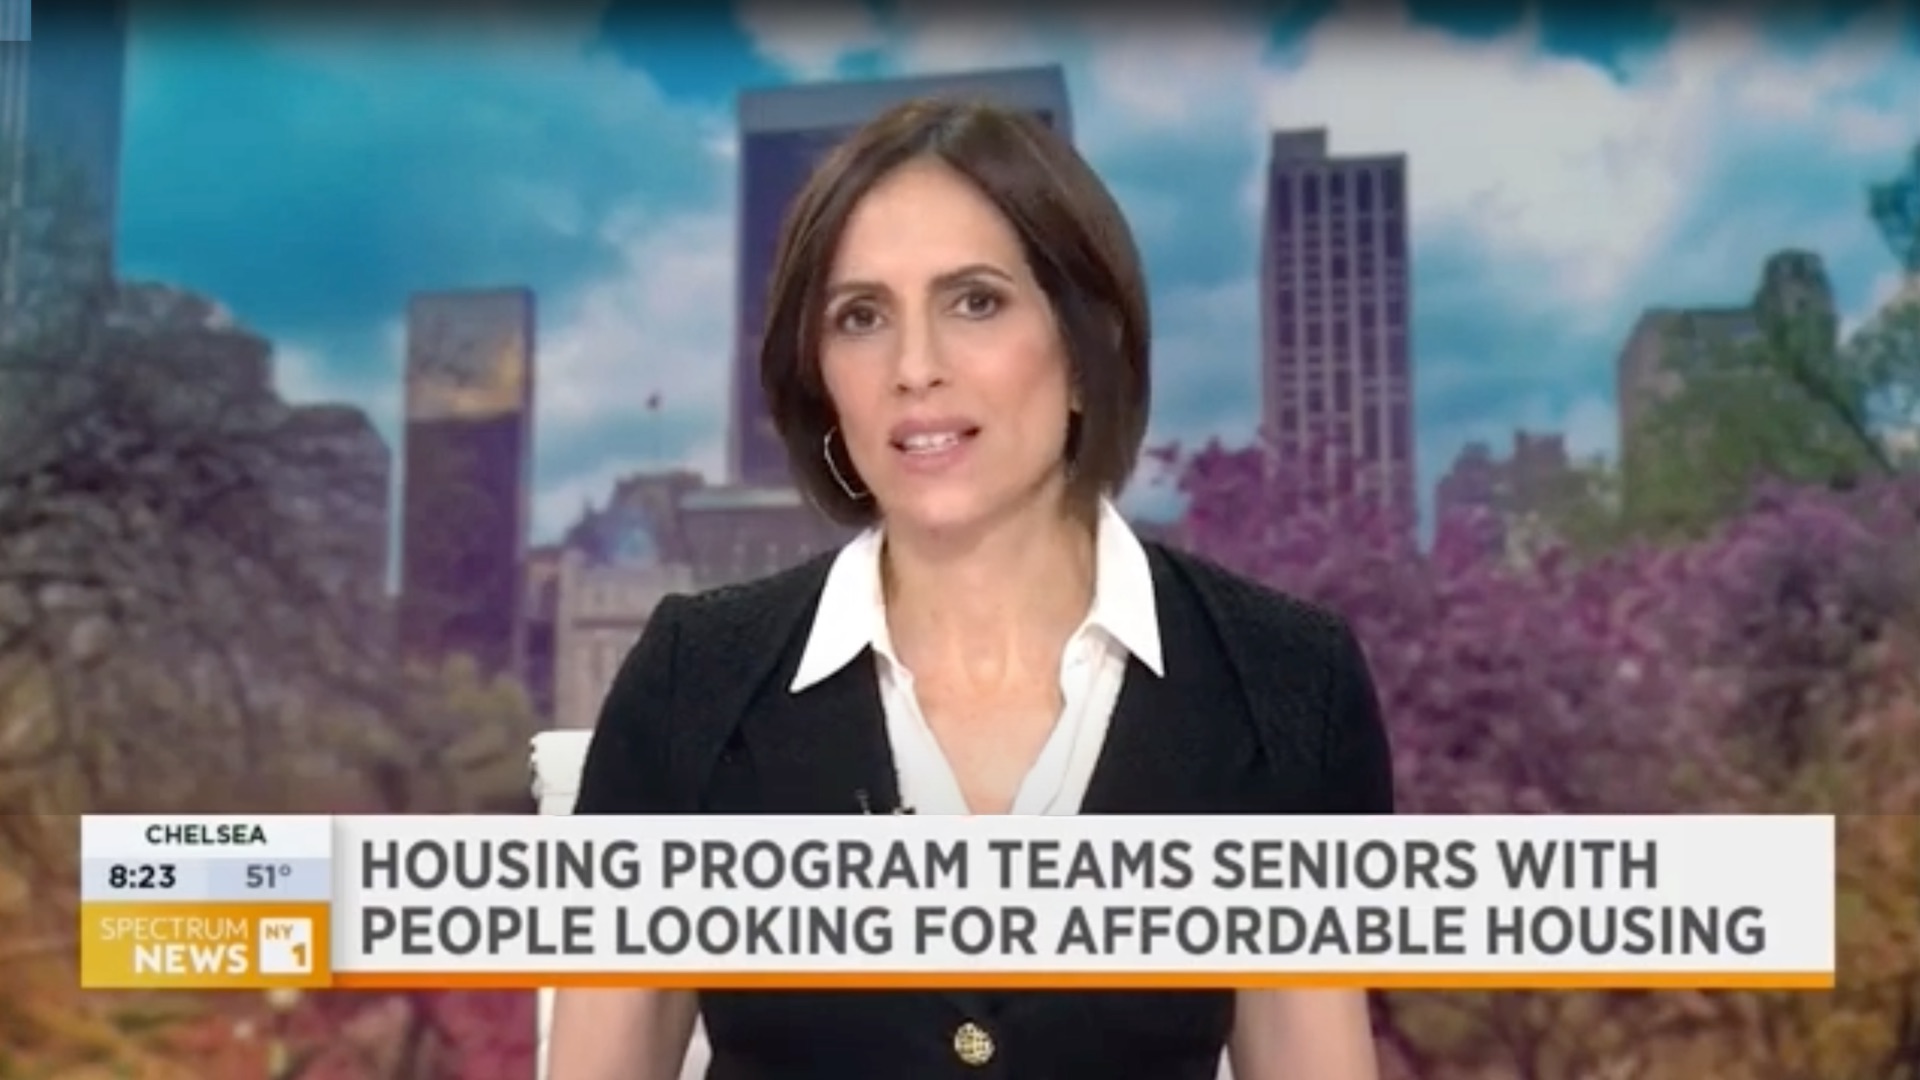 NY1: Housing Program Teams Seniors with People Looking for Affordable Housing